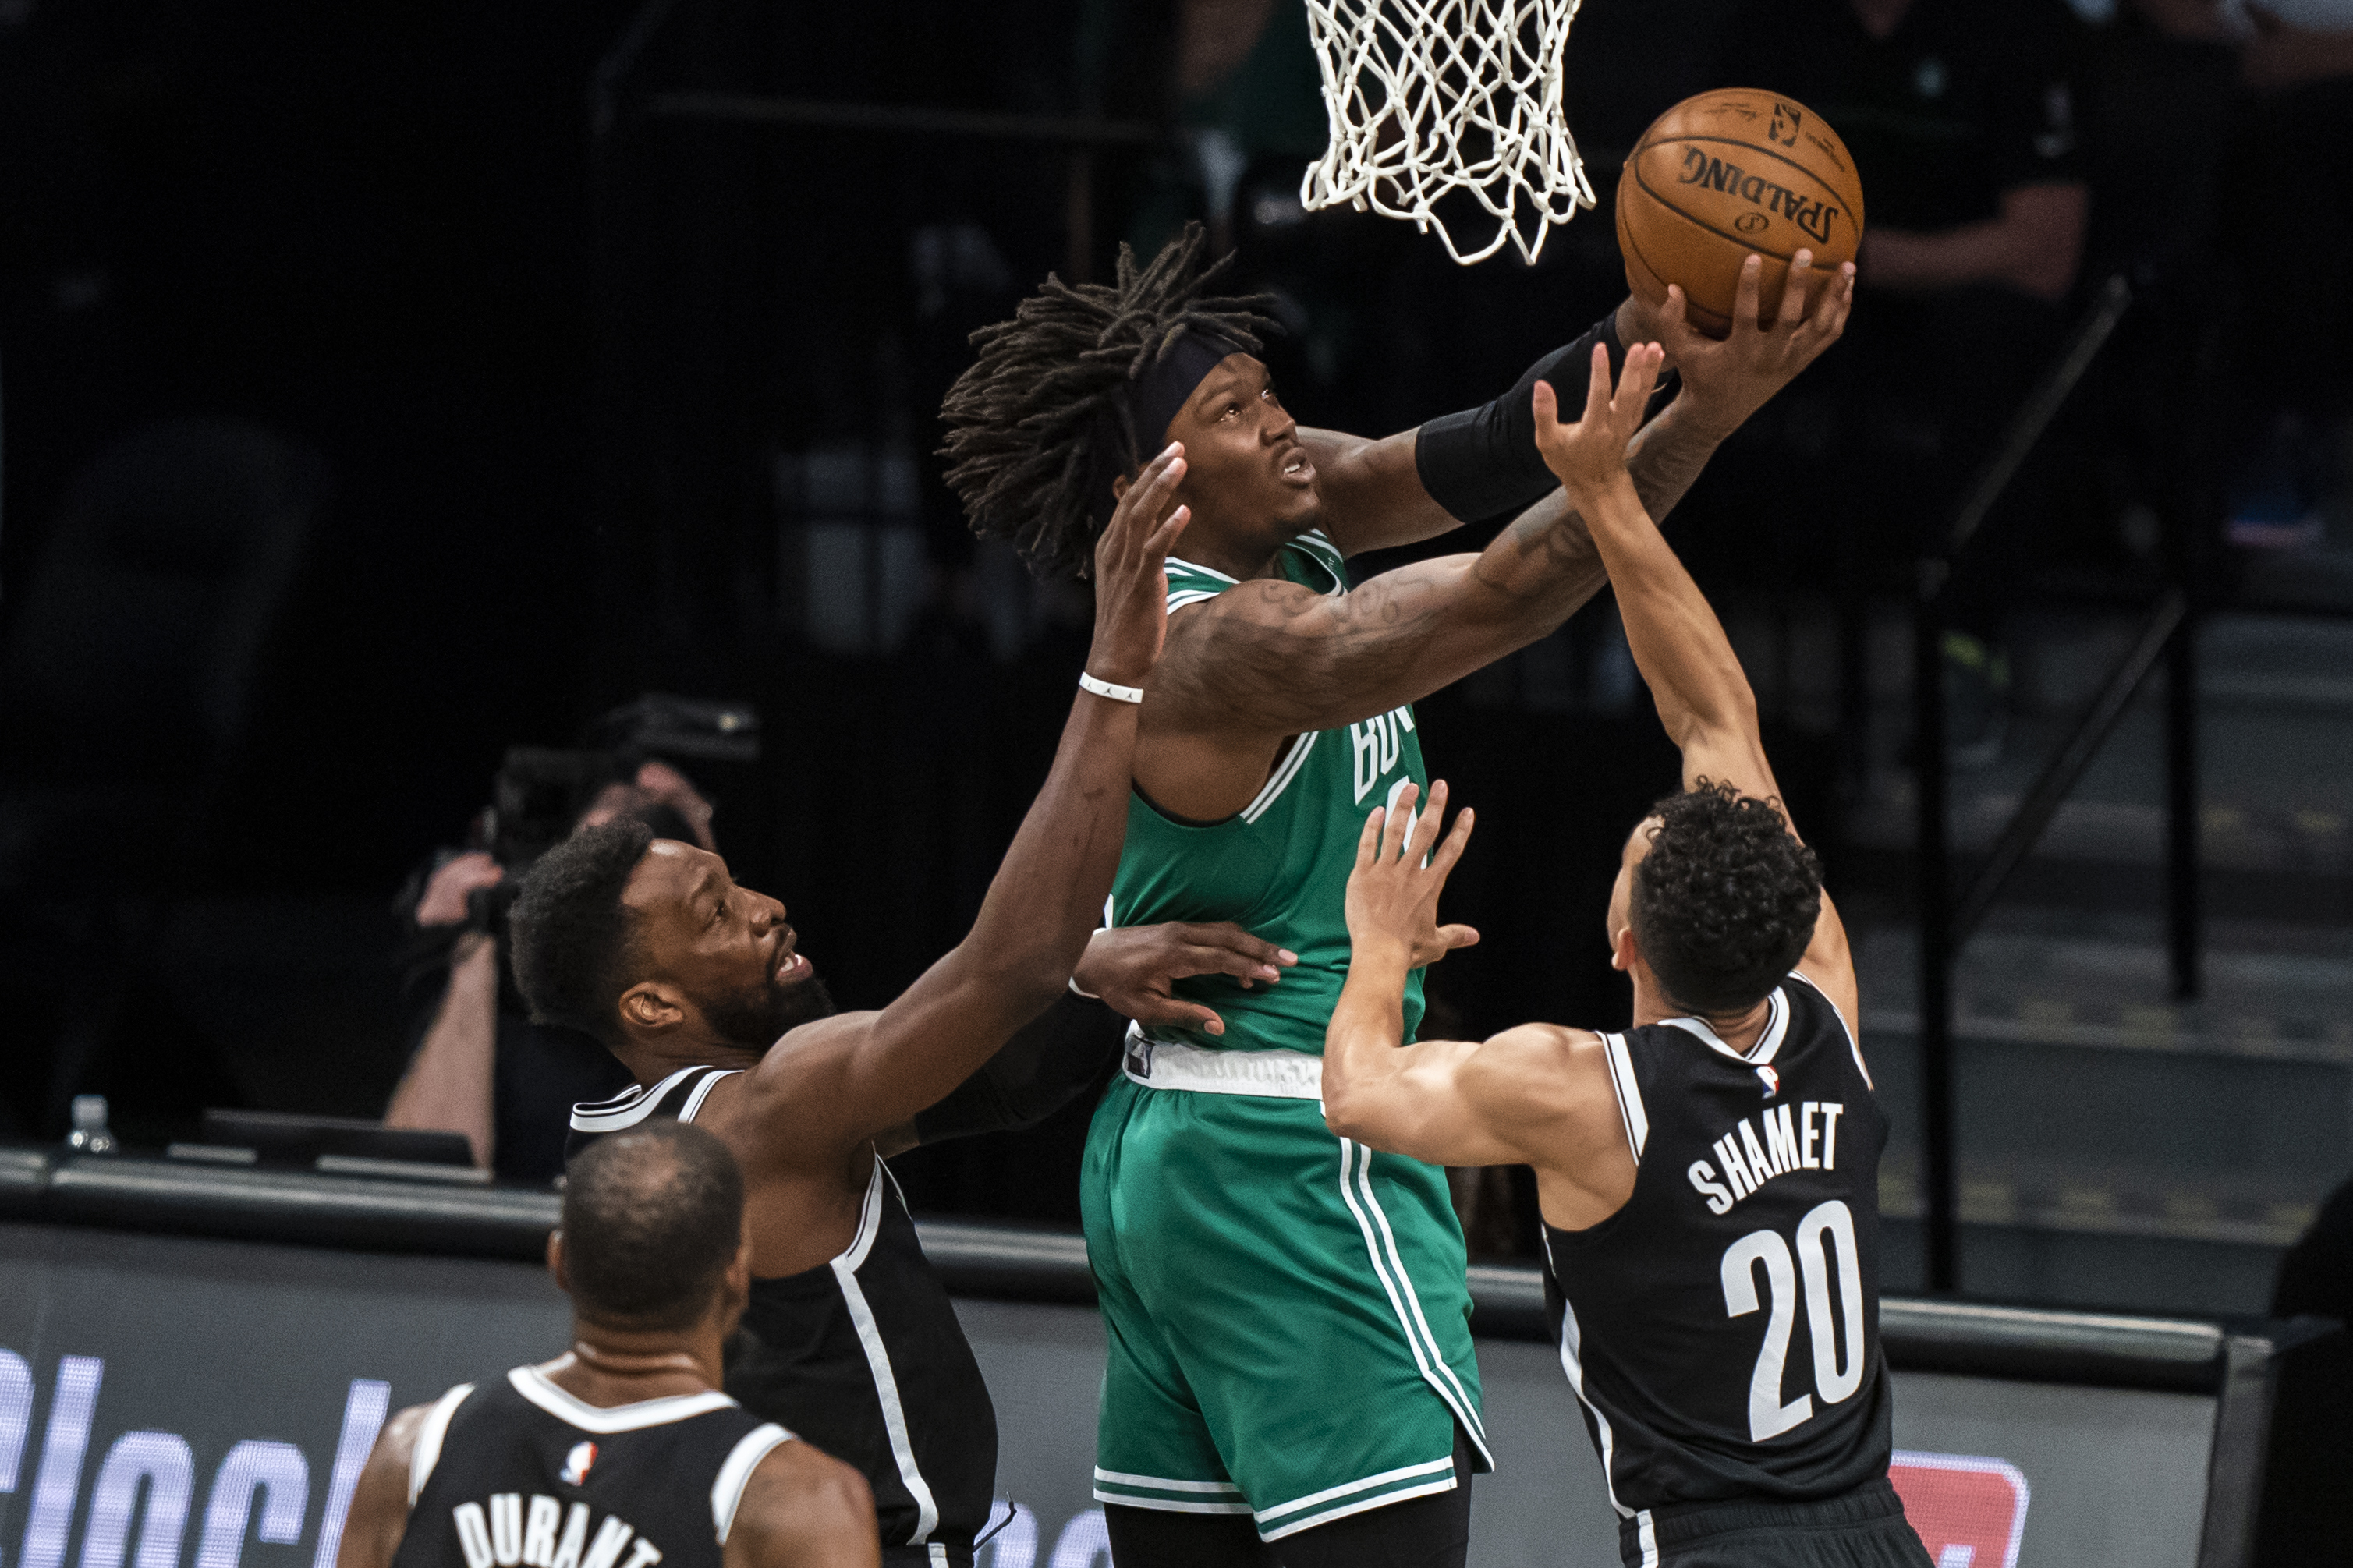 The Celtics knew how to attack the Nets' defense, but didn't show it. Will  that change in Game 2? - The Boston Globe